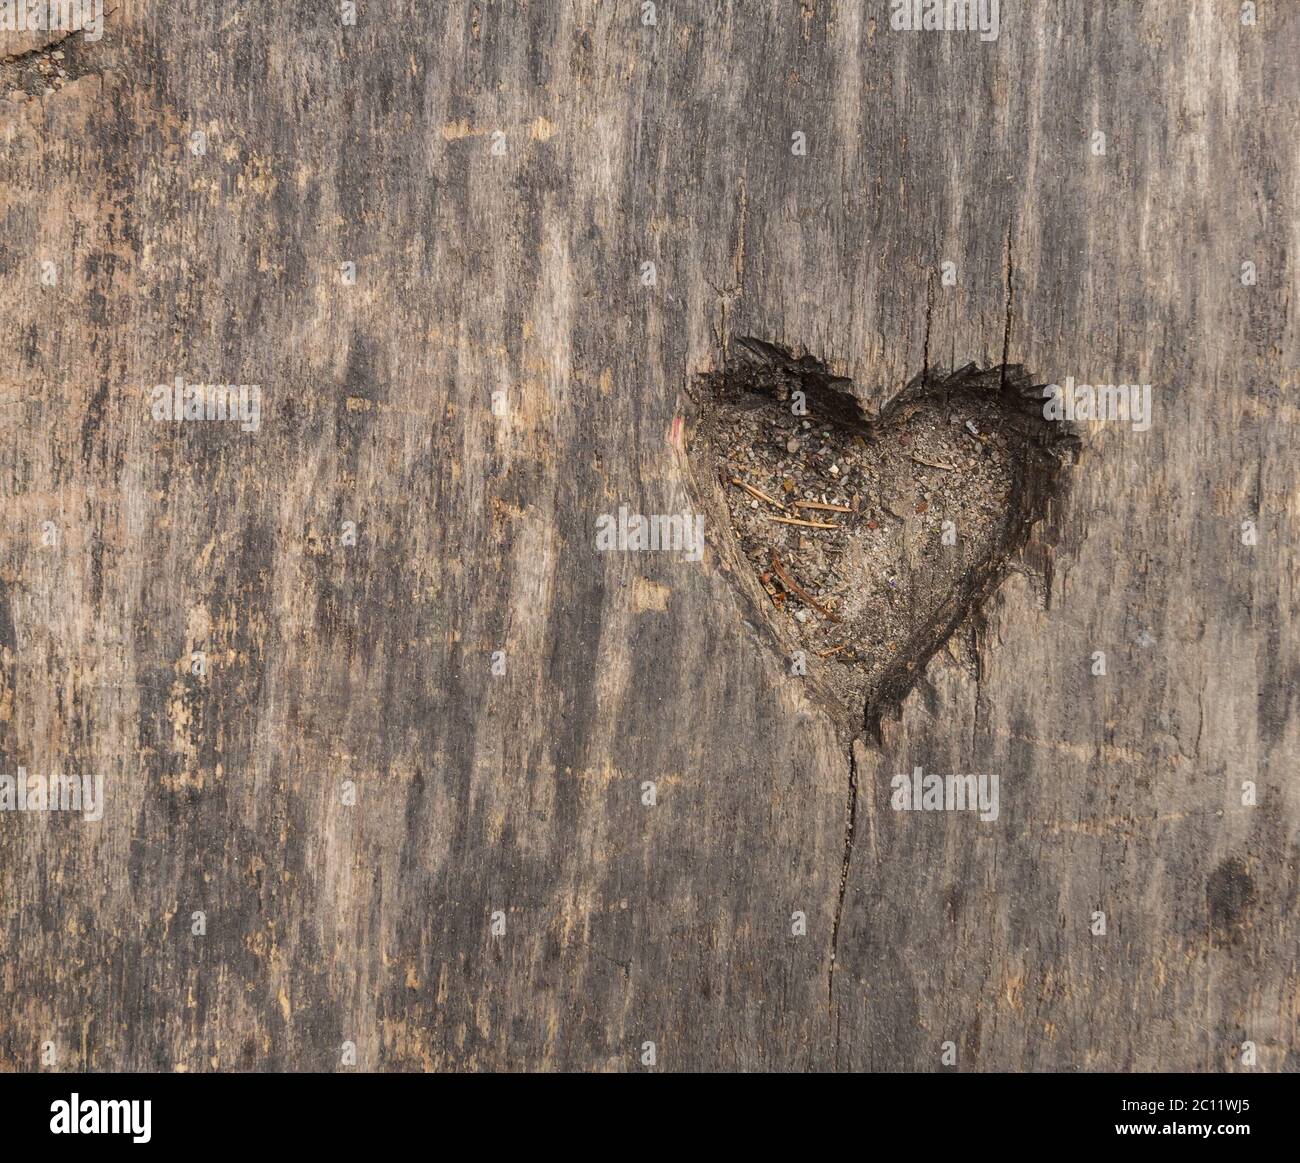 Small heart shape cut in old wood. Picture useful as background Stock Photo